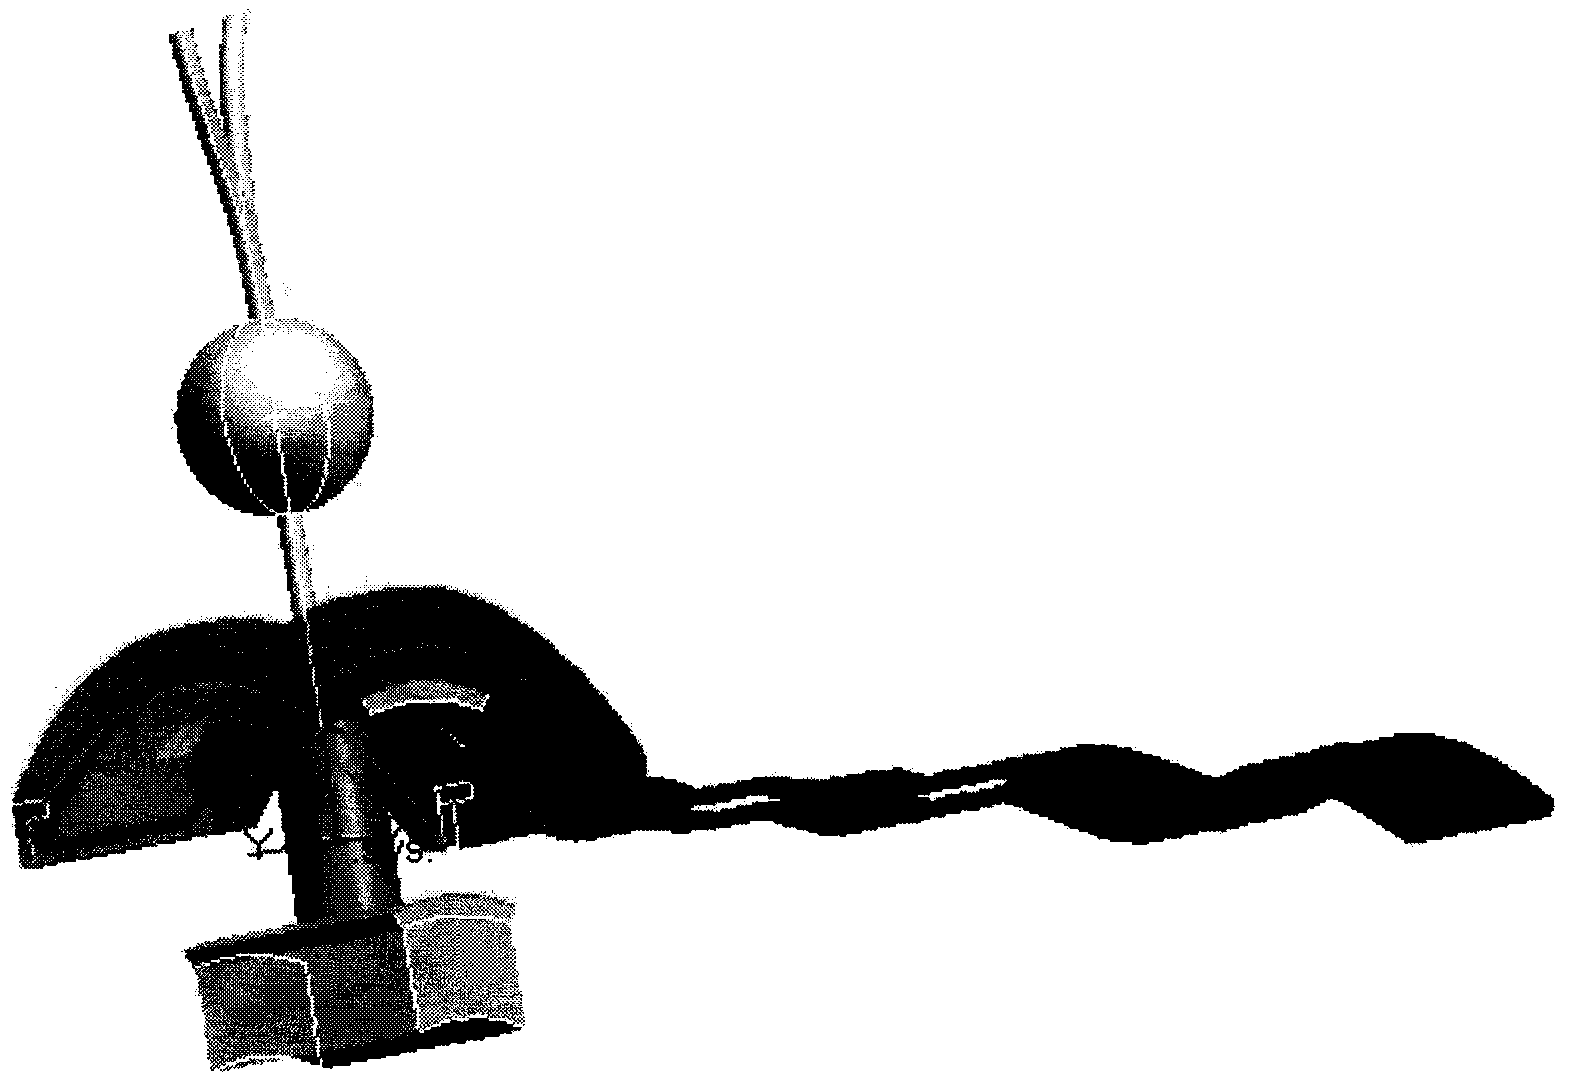 Pressure dressing device used after neck operation